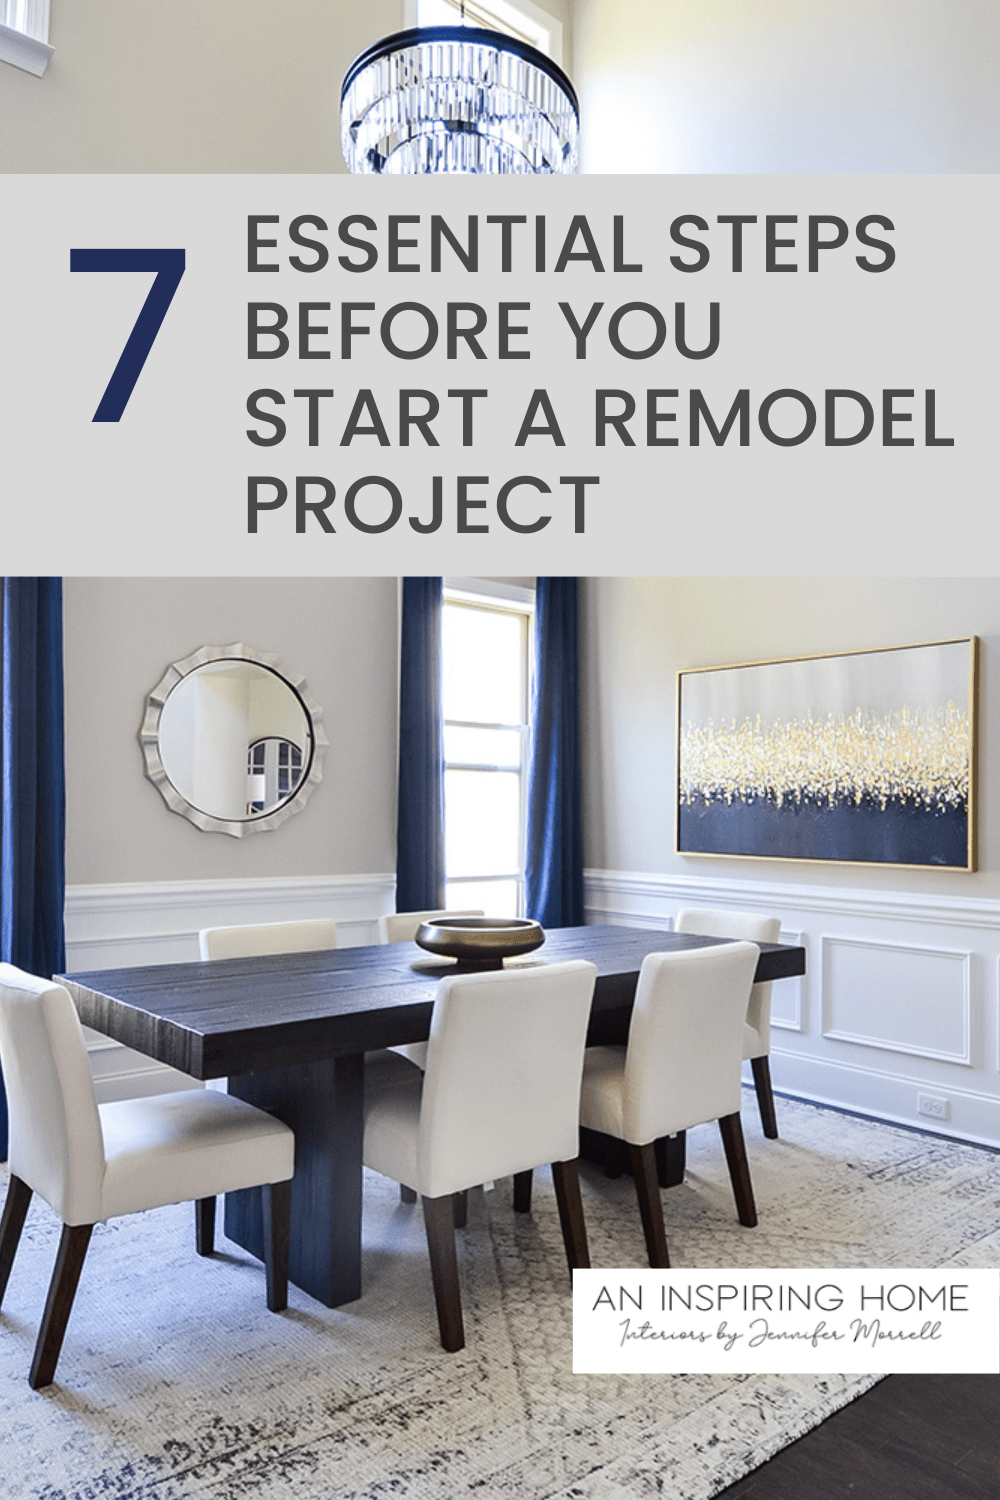 7 essential steps before you start a remodel project